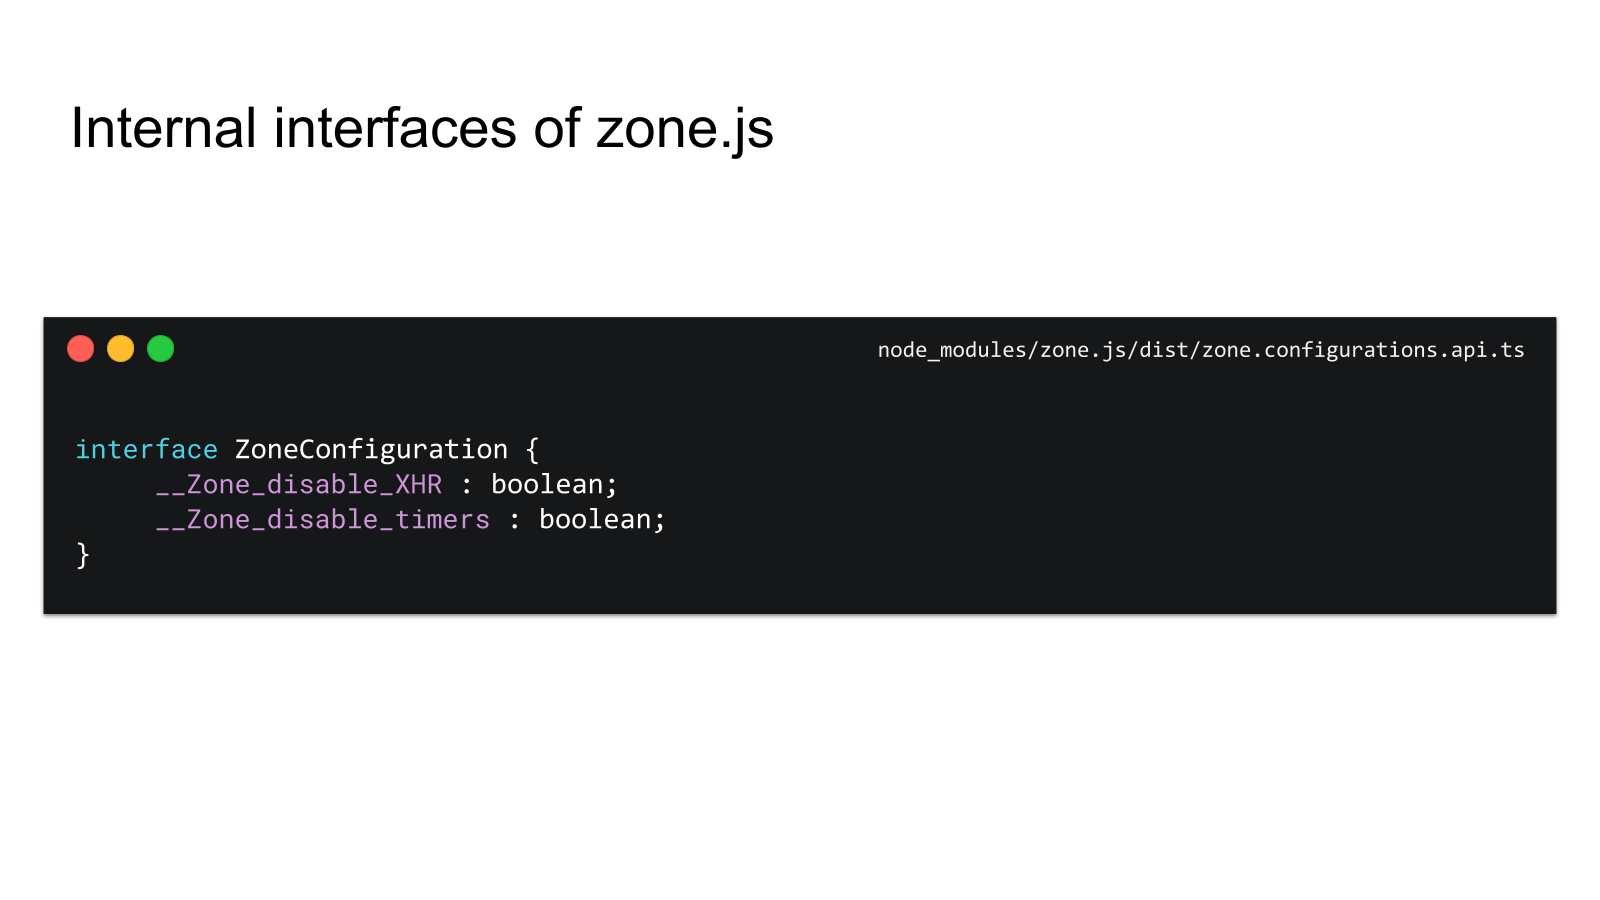 Internal interfaces of zone.js